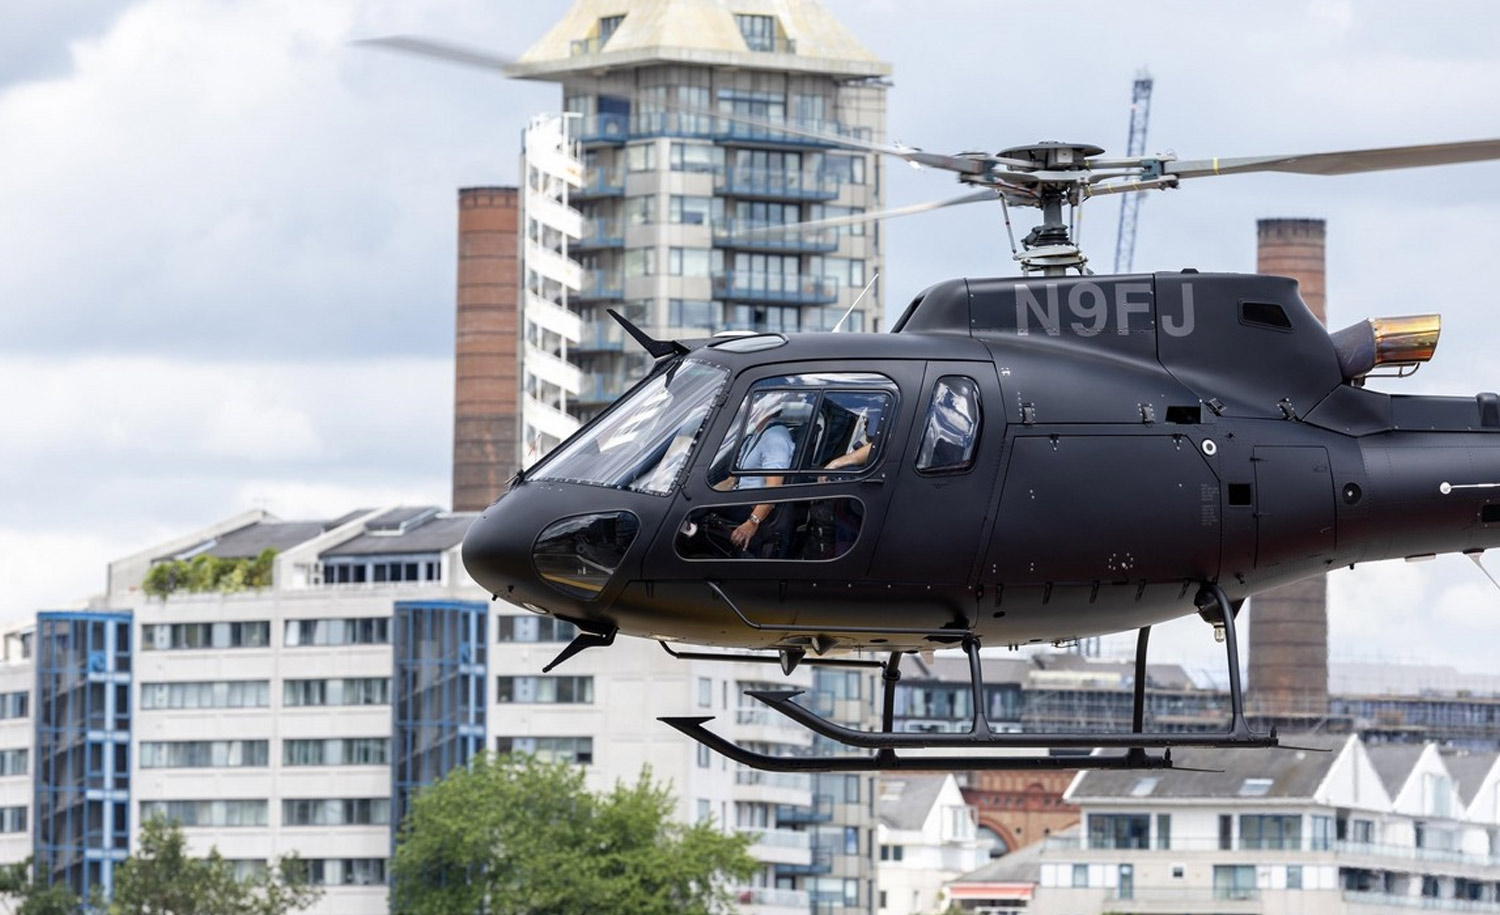 Tom Cruise’s private jet and helicopter make mysterious movements around the UK